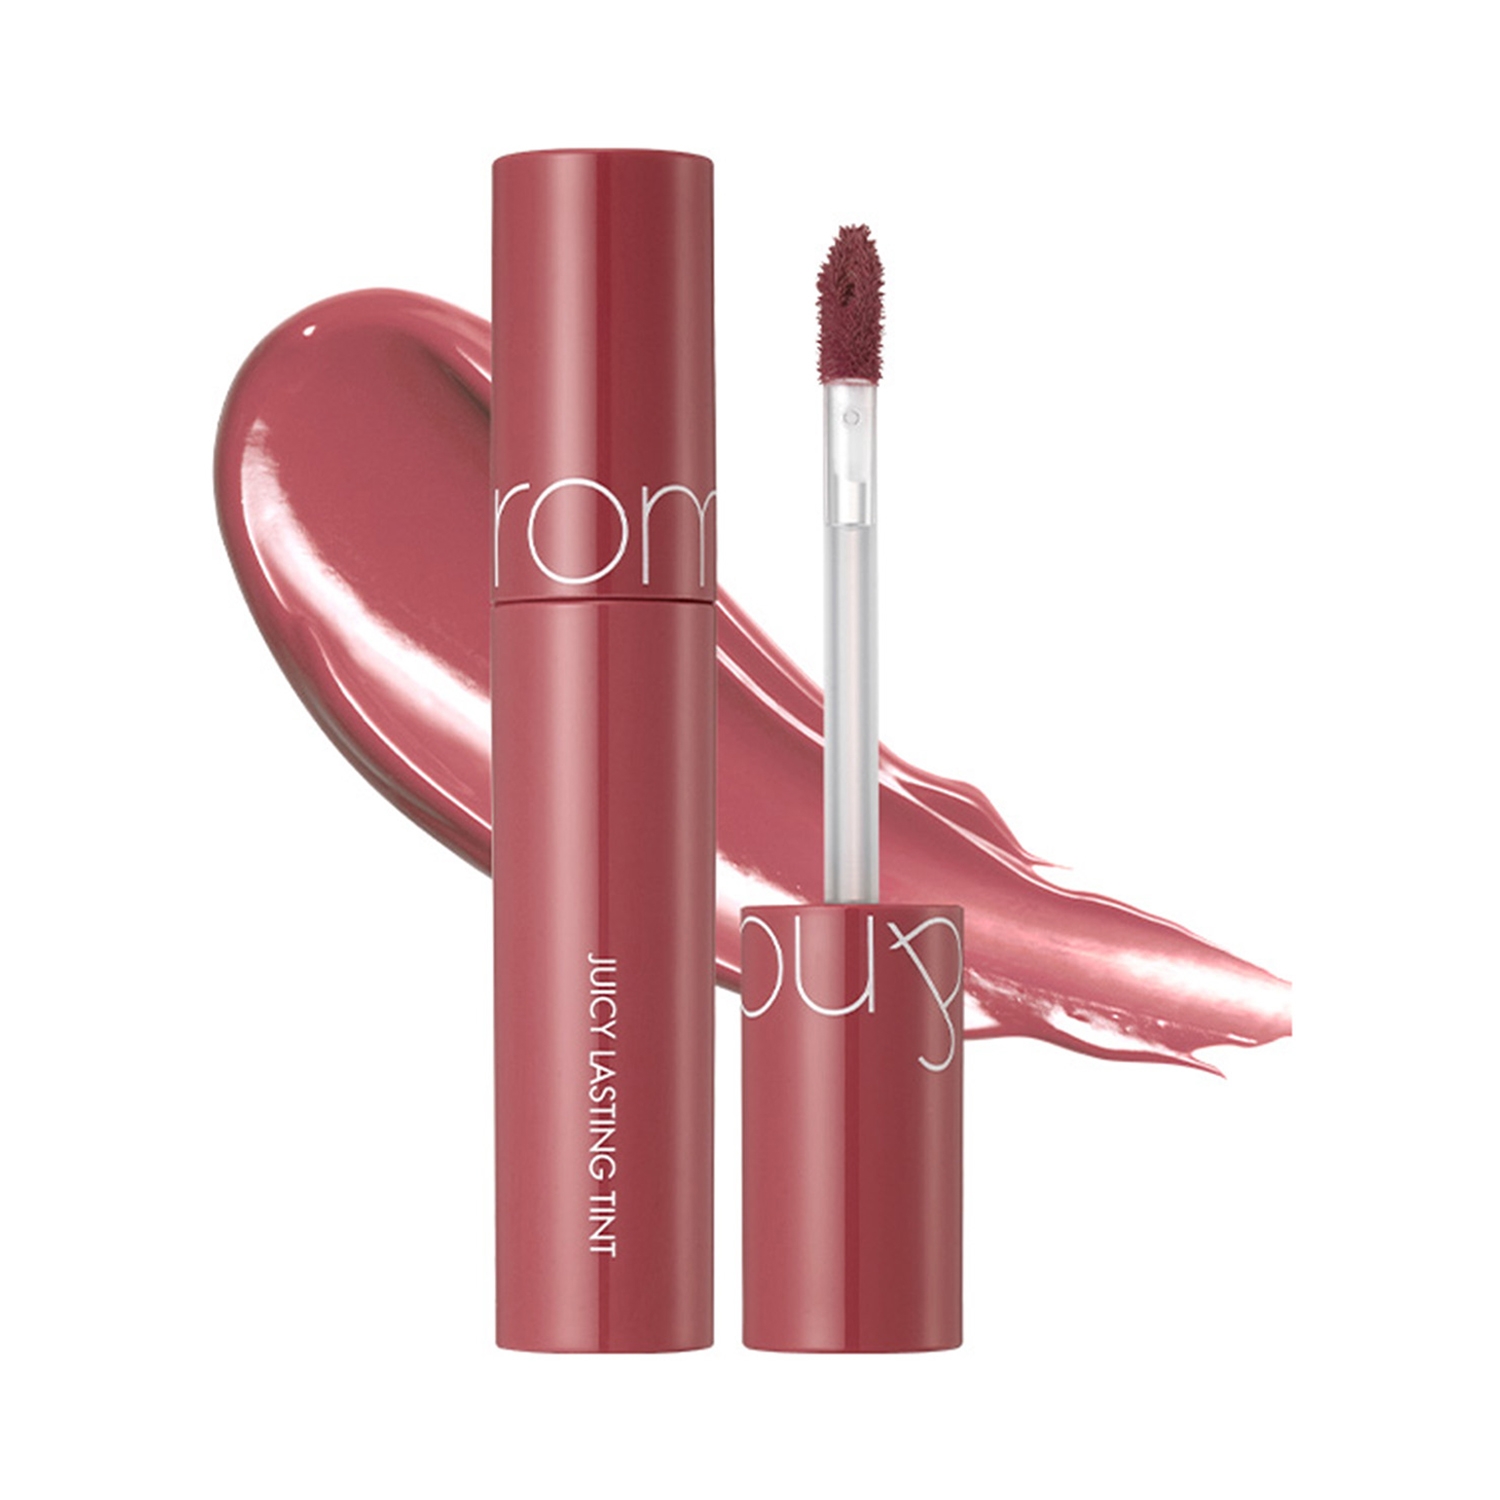 Rom&nd | Rom&nd Juicy Lasting Tint - 18 Mulled Peach (5.5g)